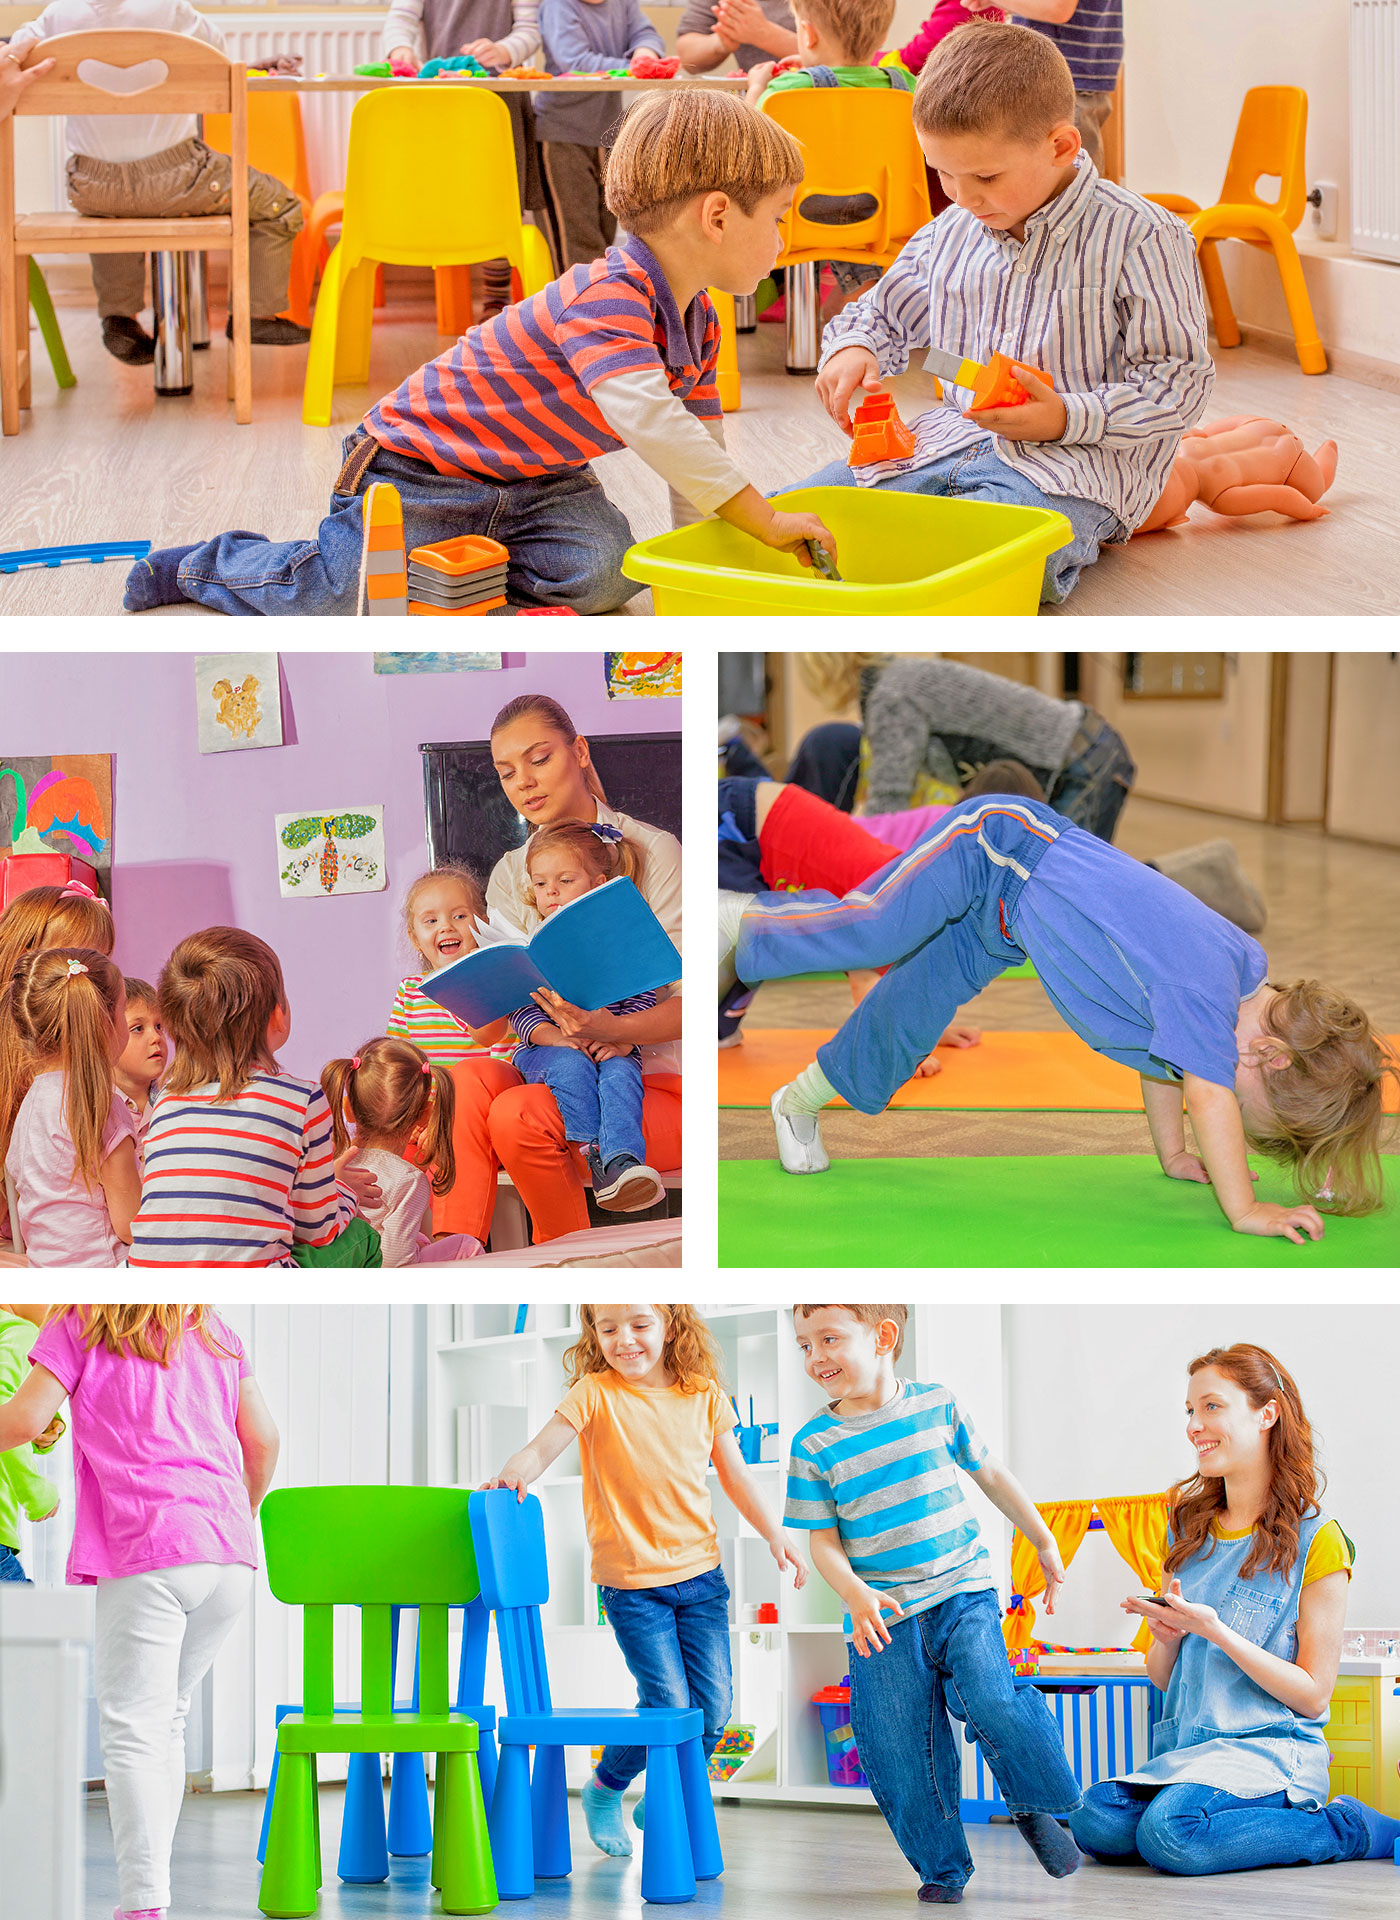 Group and play rooms require special attention